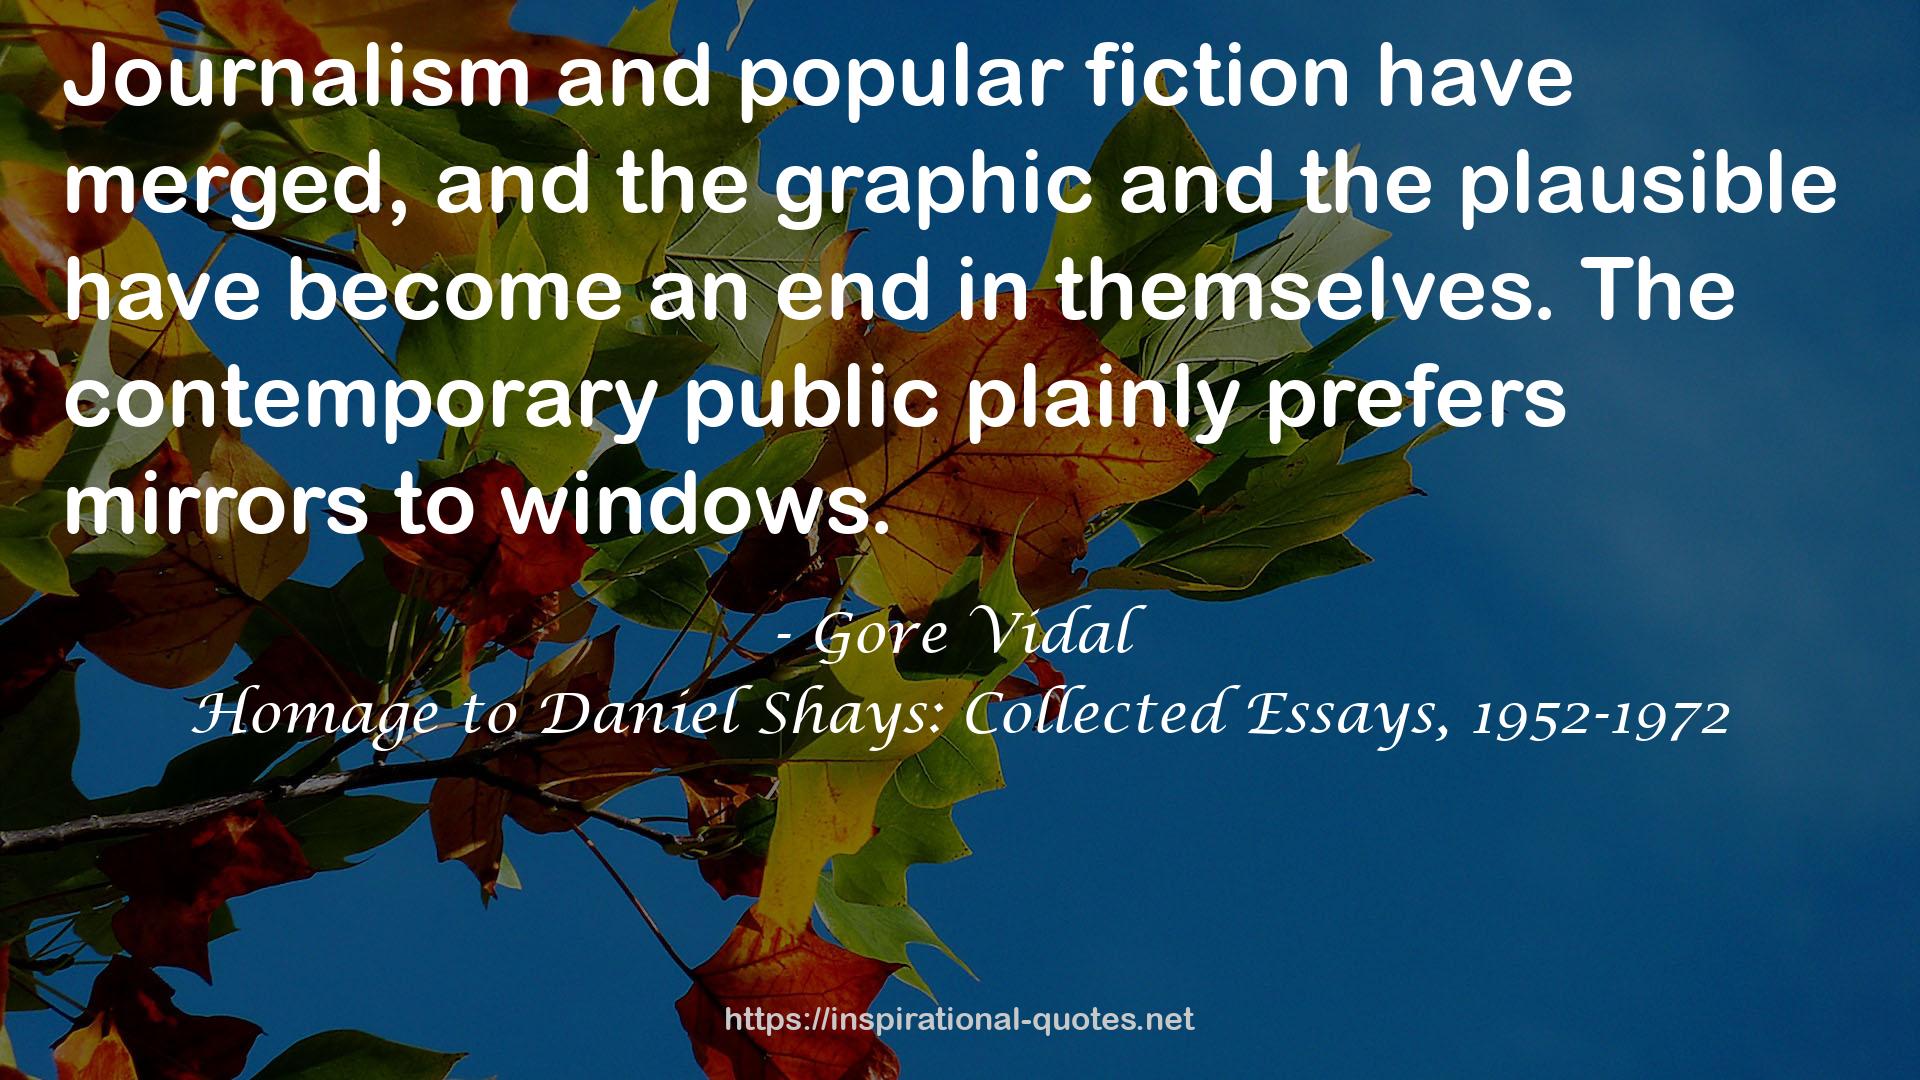 Homage to Daniel Shays: Collected Essays, 1952-1972 QUOTES